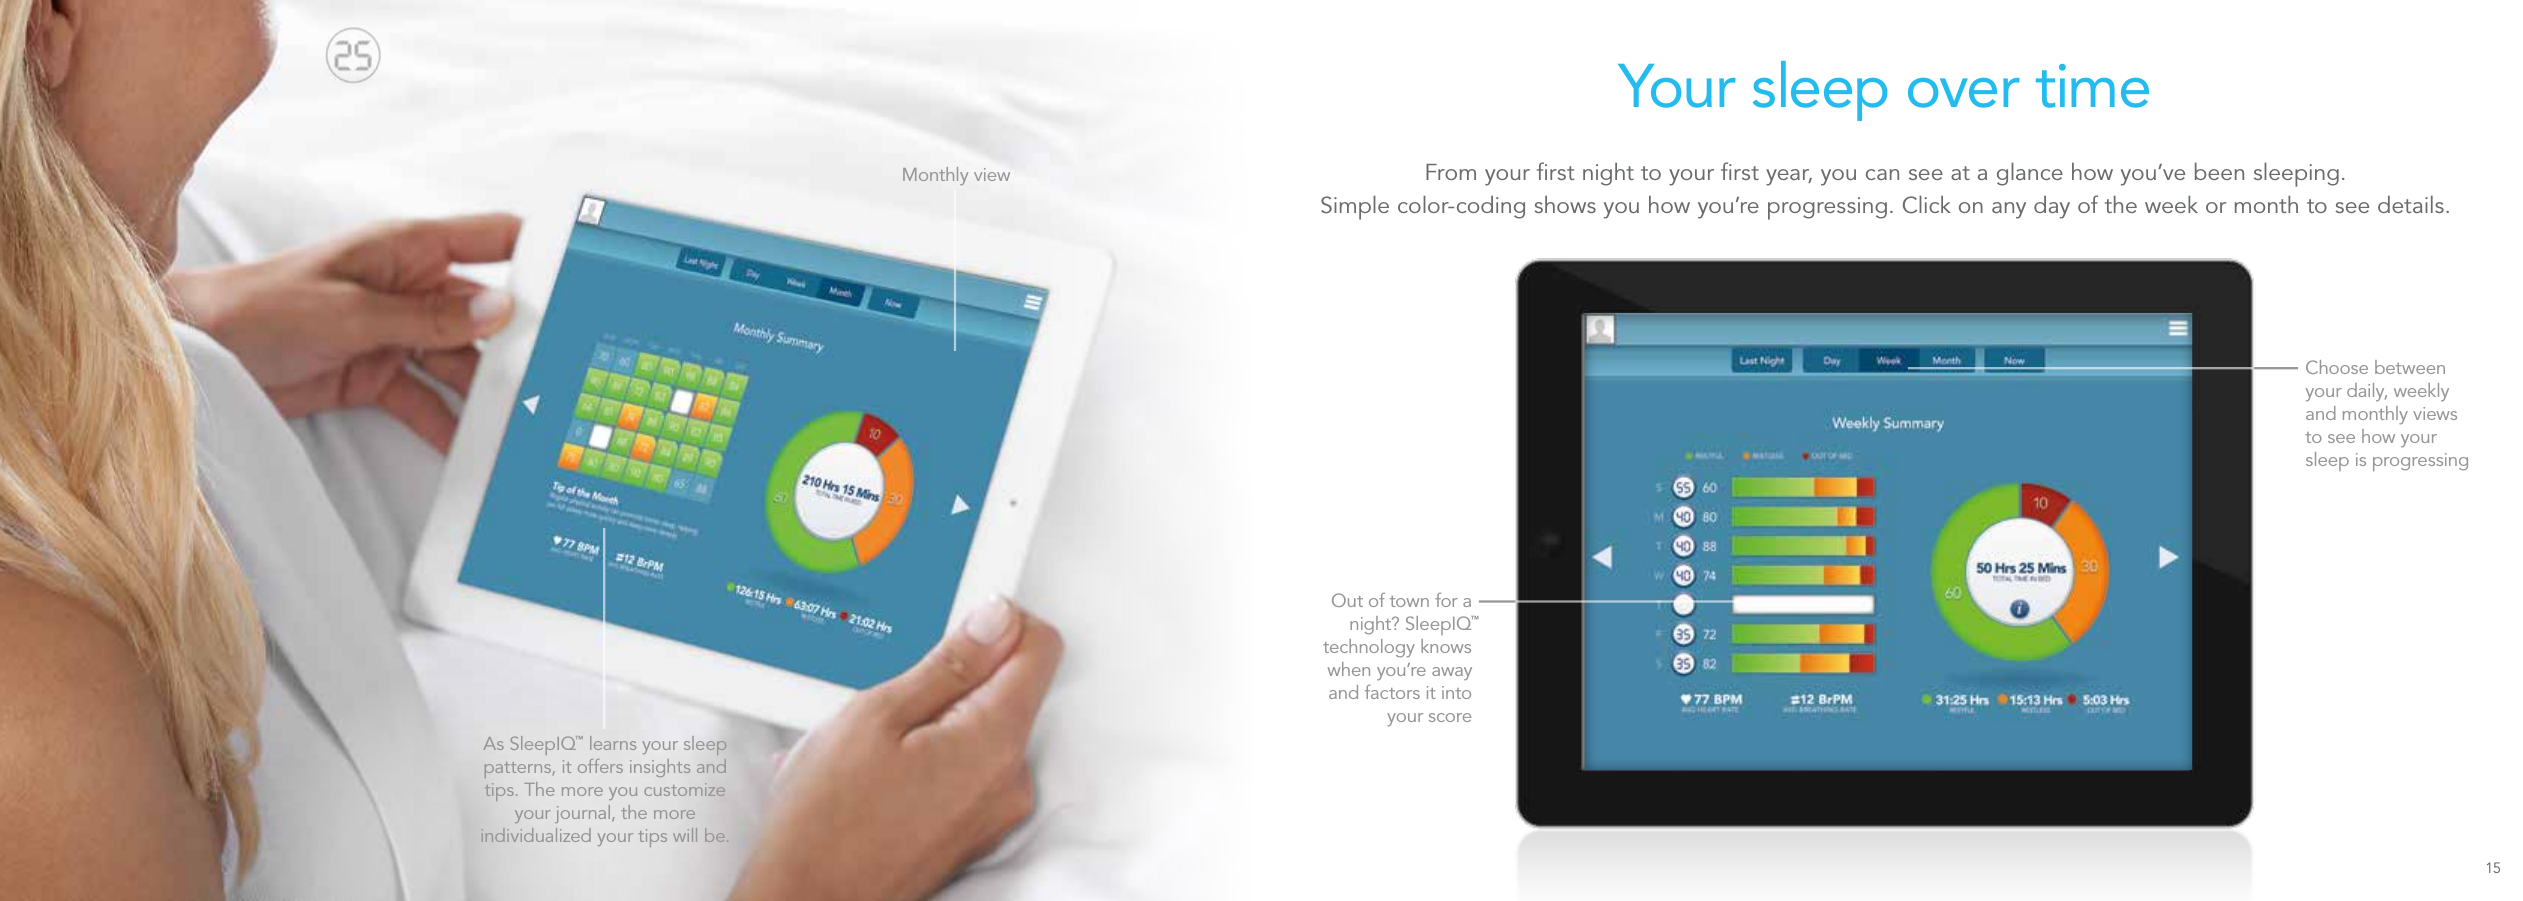 Choose between your daily, weekly and monthly views to see how your  sleep is progressing  Out of town for a  night? SleepIQ™  technology knows  when you’re away  and factors it into  your score Your sleep over timeFrom your ﬁrst night to your ﬁrst year, you can see at a glance how you’ve been sleeping.  Simple color-coding shows you how you’re progressing. Click on any day of the week or month to see details.Monthly viewAs SleepIQ™ learns your sleep patterns, it offers insights and tips. The more you customize your journal, the more individualized your tips will be.15